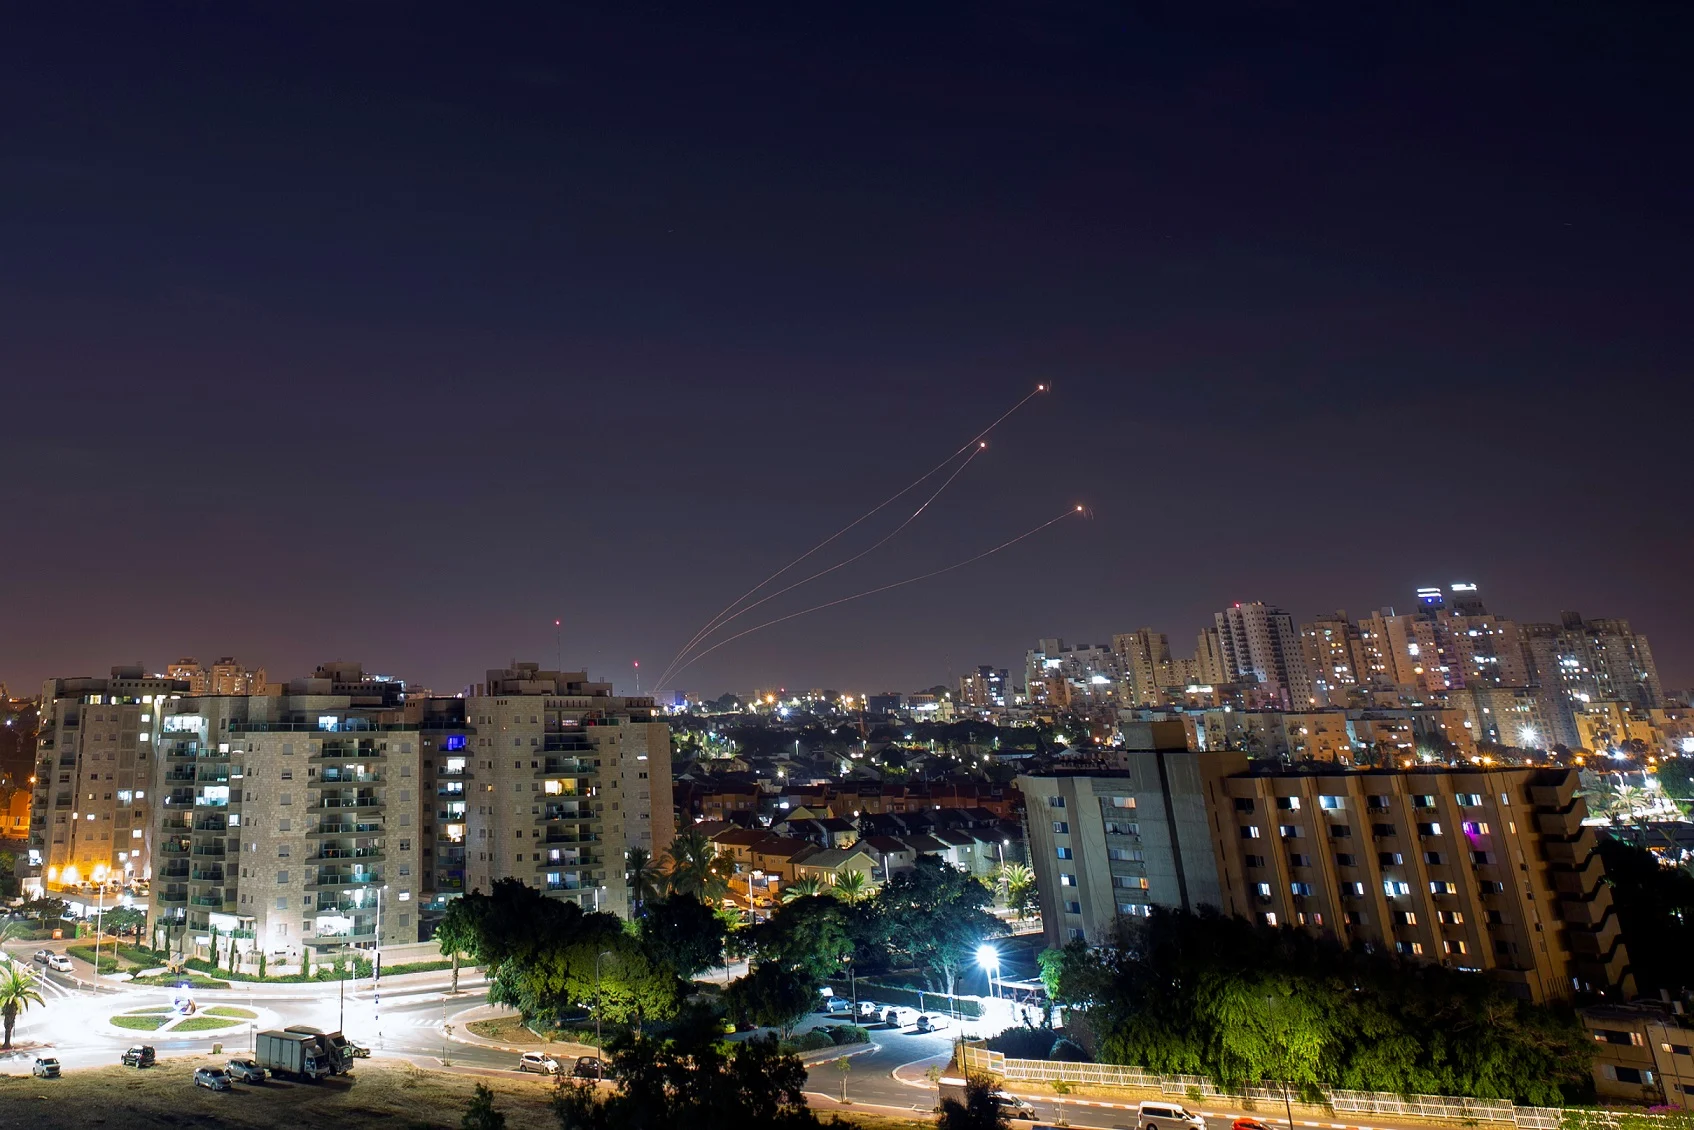 Iron Dome Anti Missile System Fires Interception Missiles As Rockets Are Launched From Gaza Towards Israel, As Seen From The City Of Ashkelon